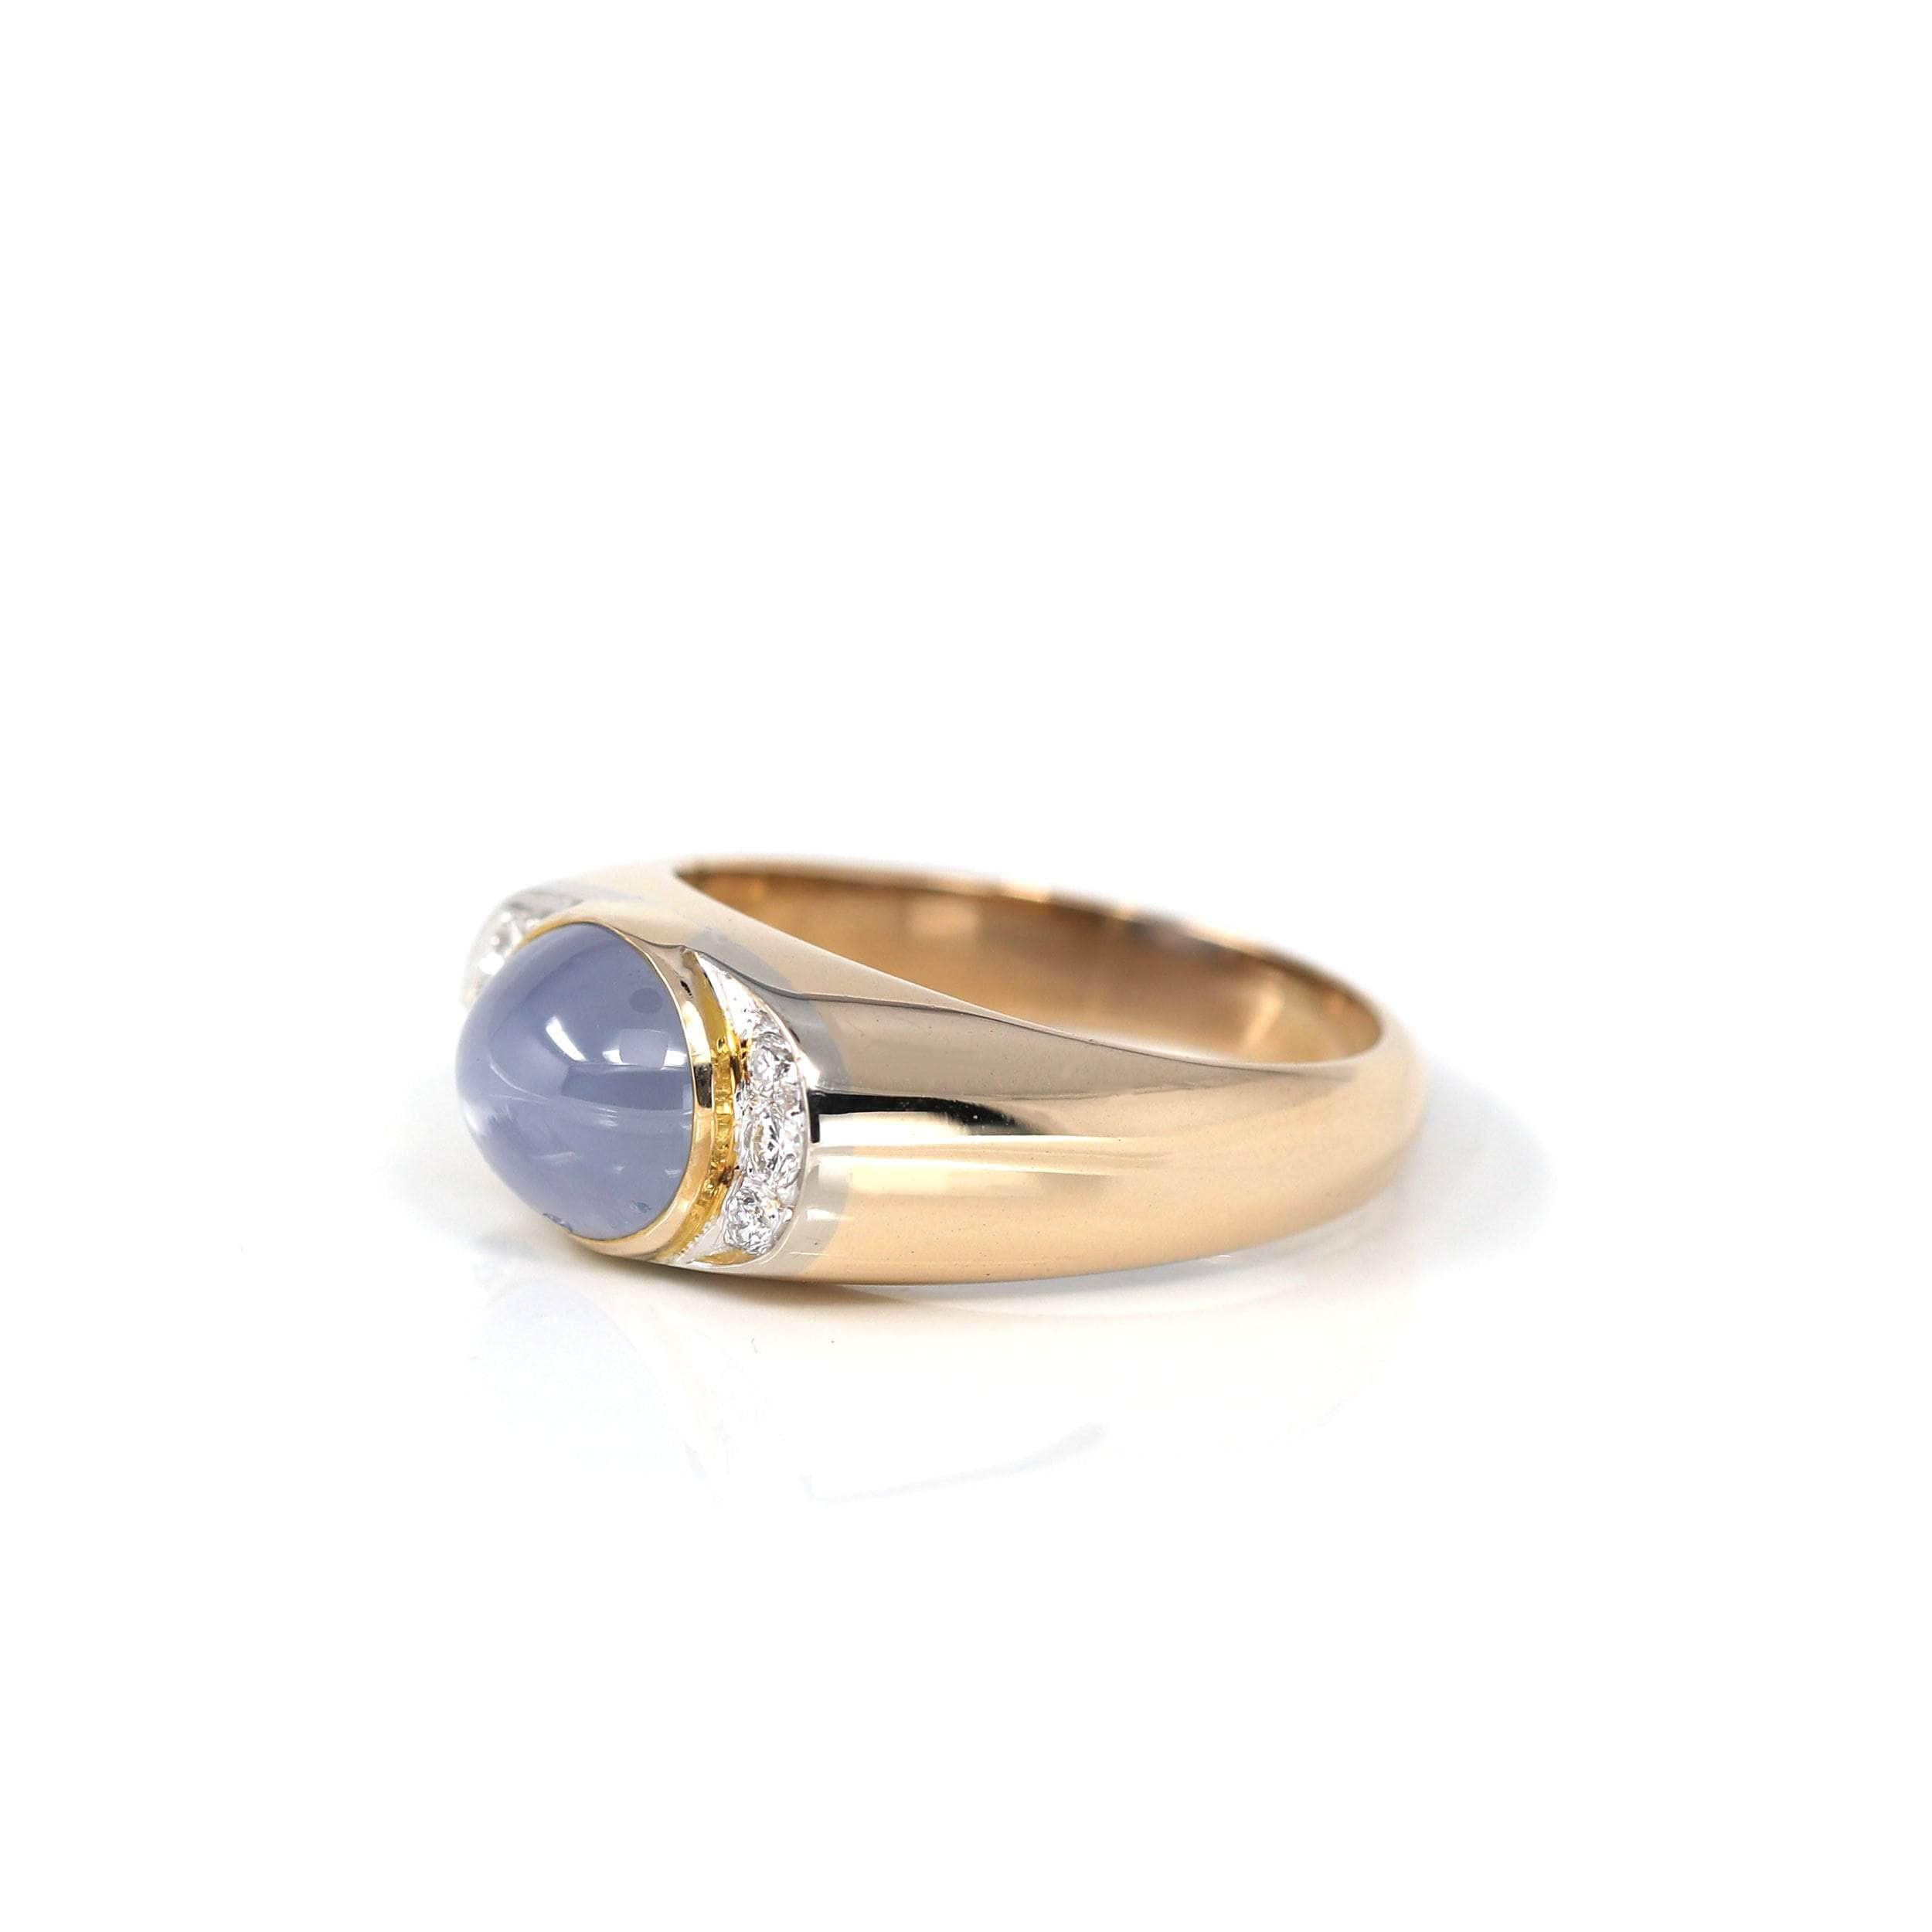 * Design Concept--- This ring features a cabochon genuine Sir Lanka Star Sapphire. The design is simplistic yet elegant. The ring looks very exquisite with some diamonds tracing the accents. Baikalla artisans are dedicated to combining beautiful